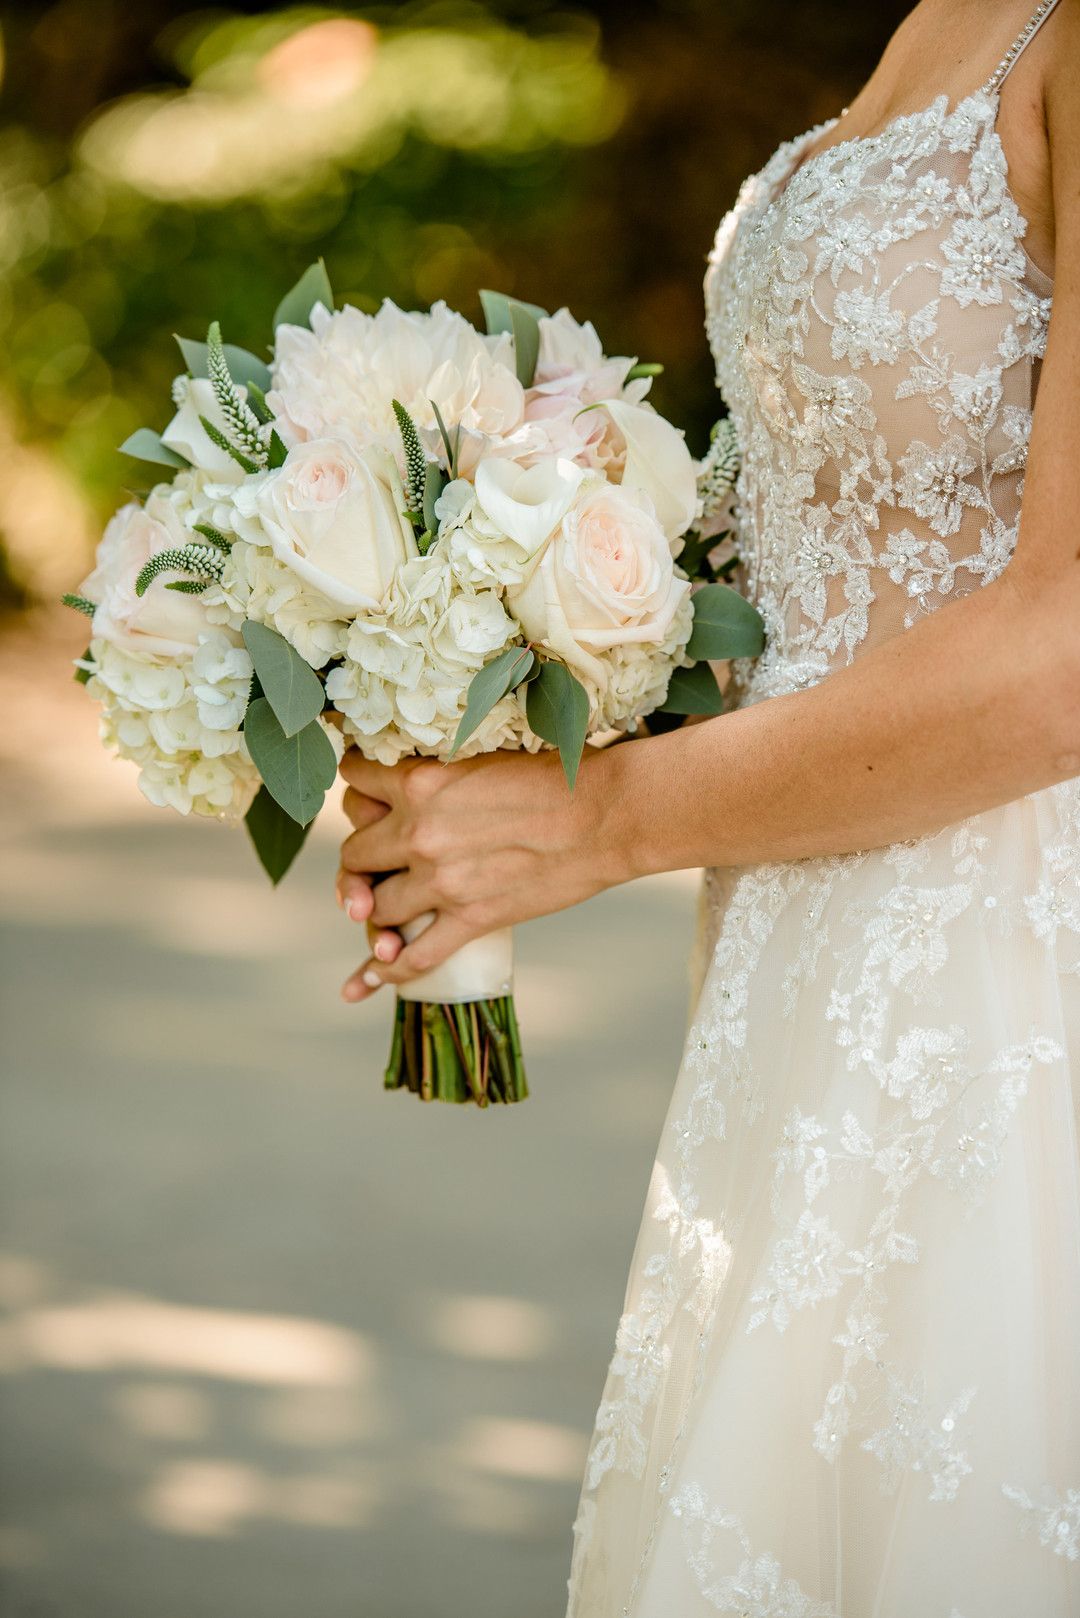 Summer Wedding Bouquets Ideas to Embrace